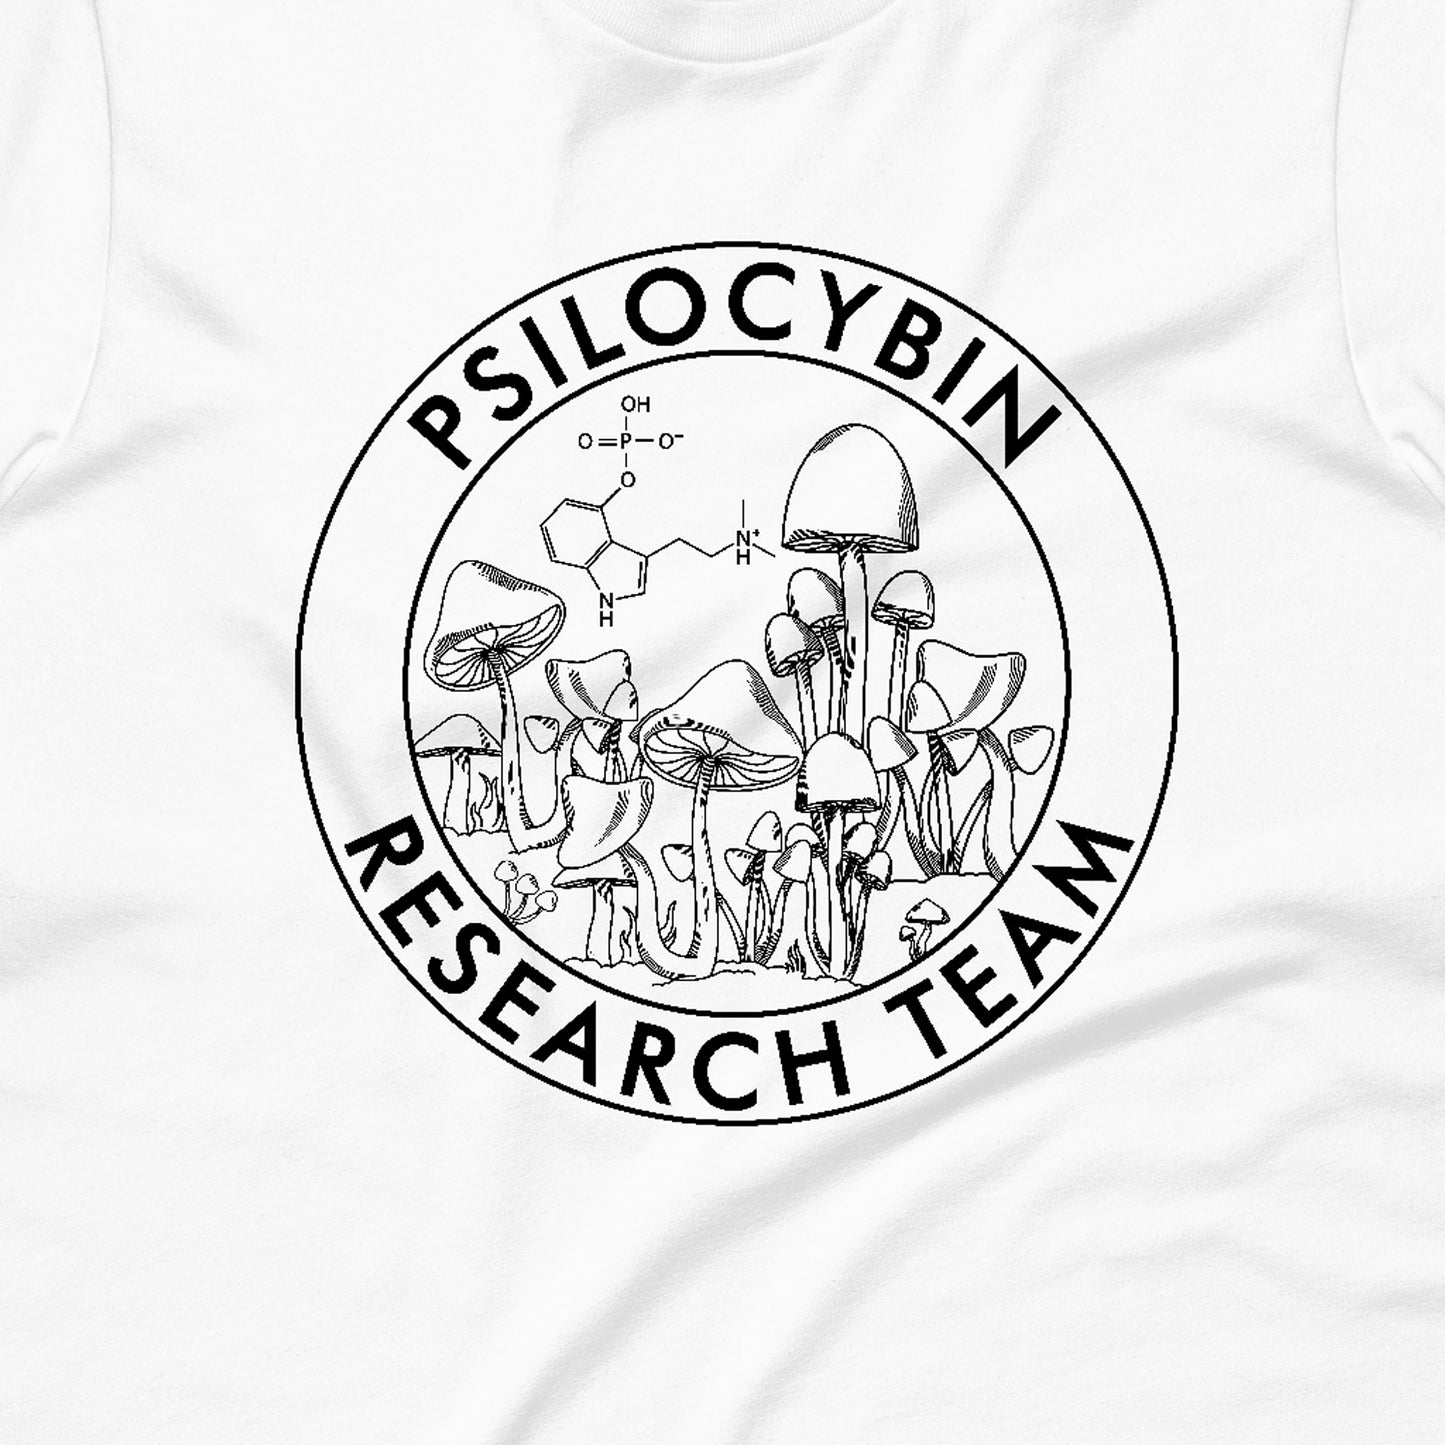 Research Team Graphic Long Sleeve Tee